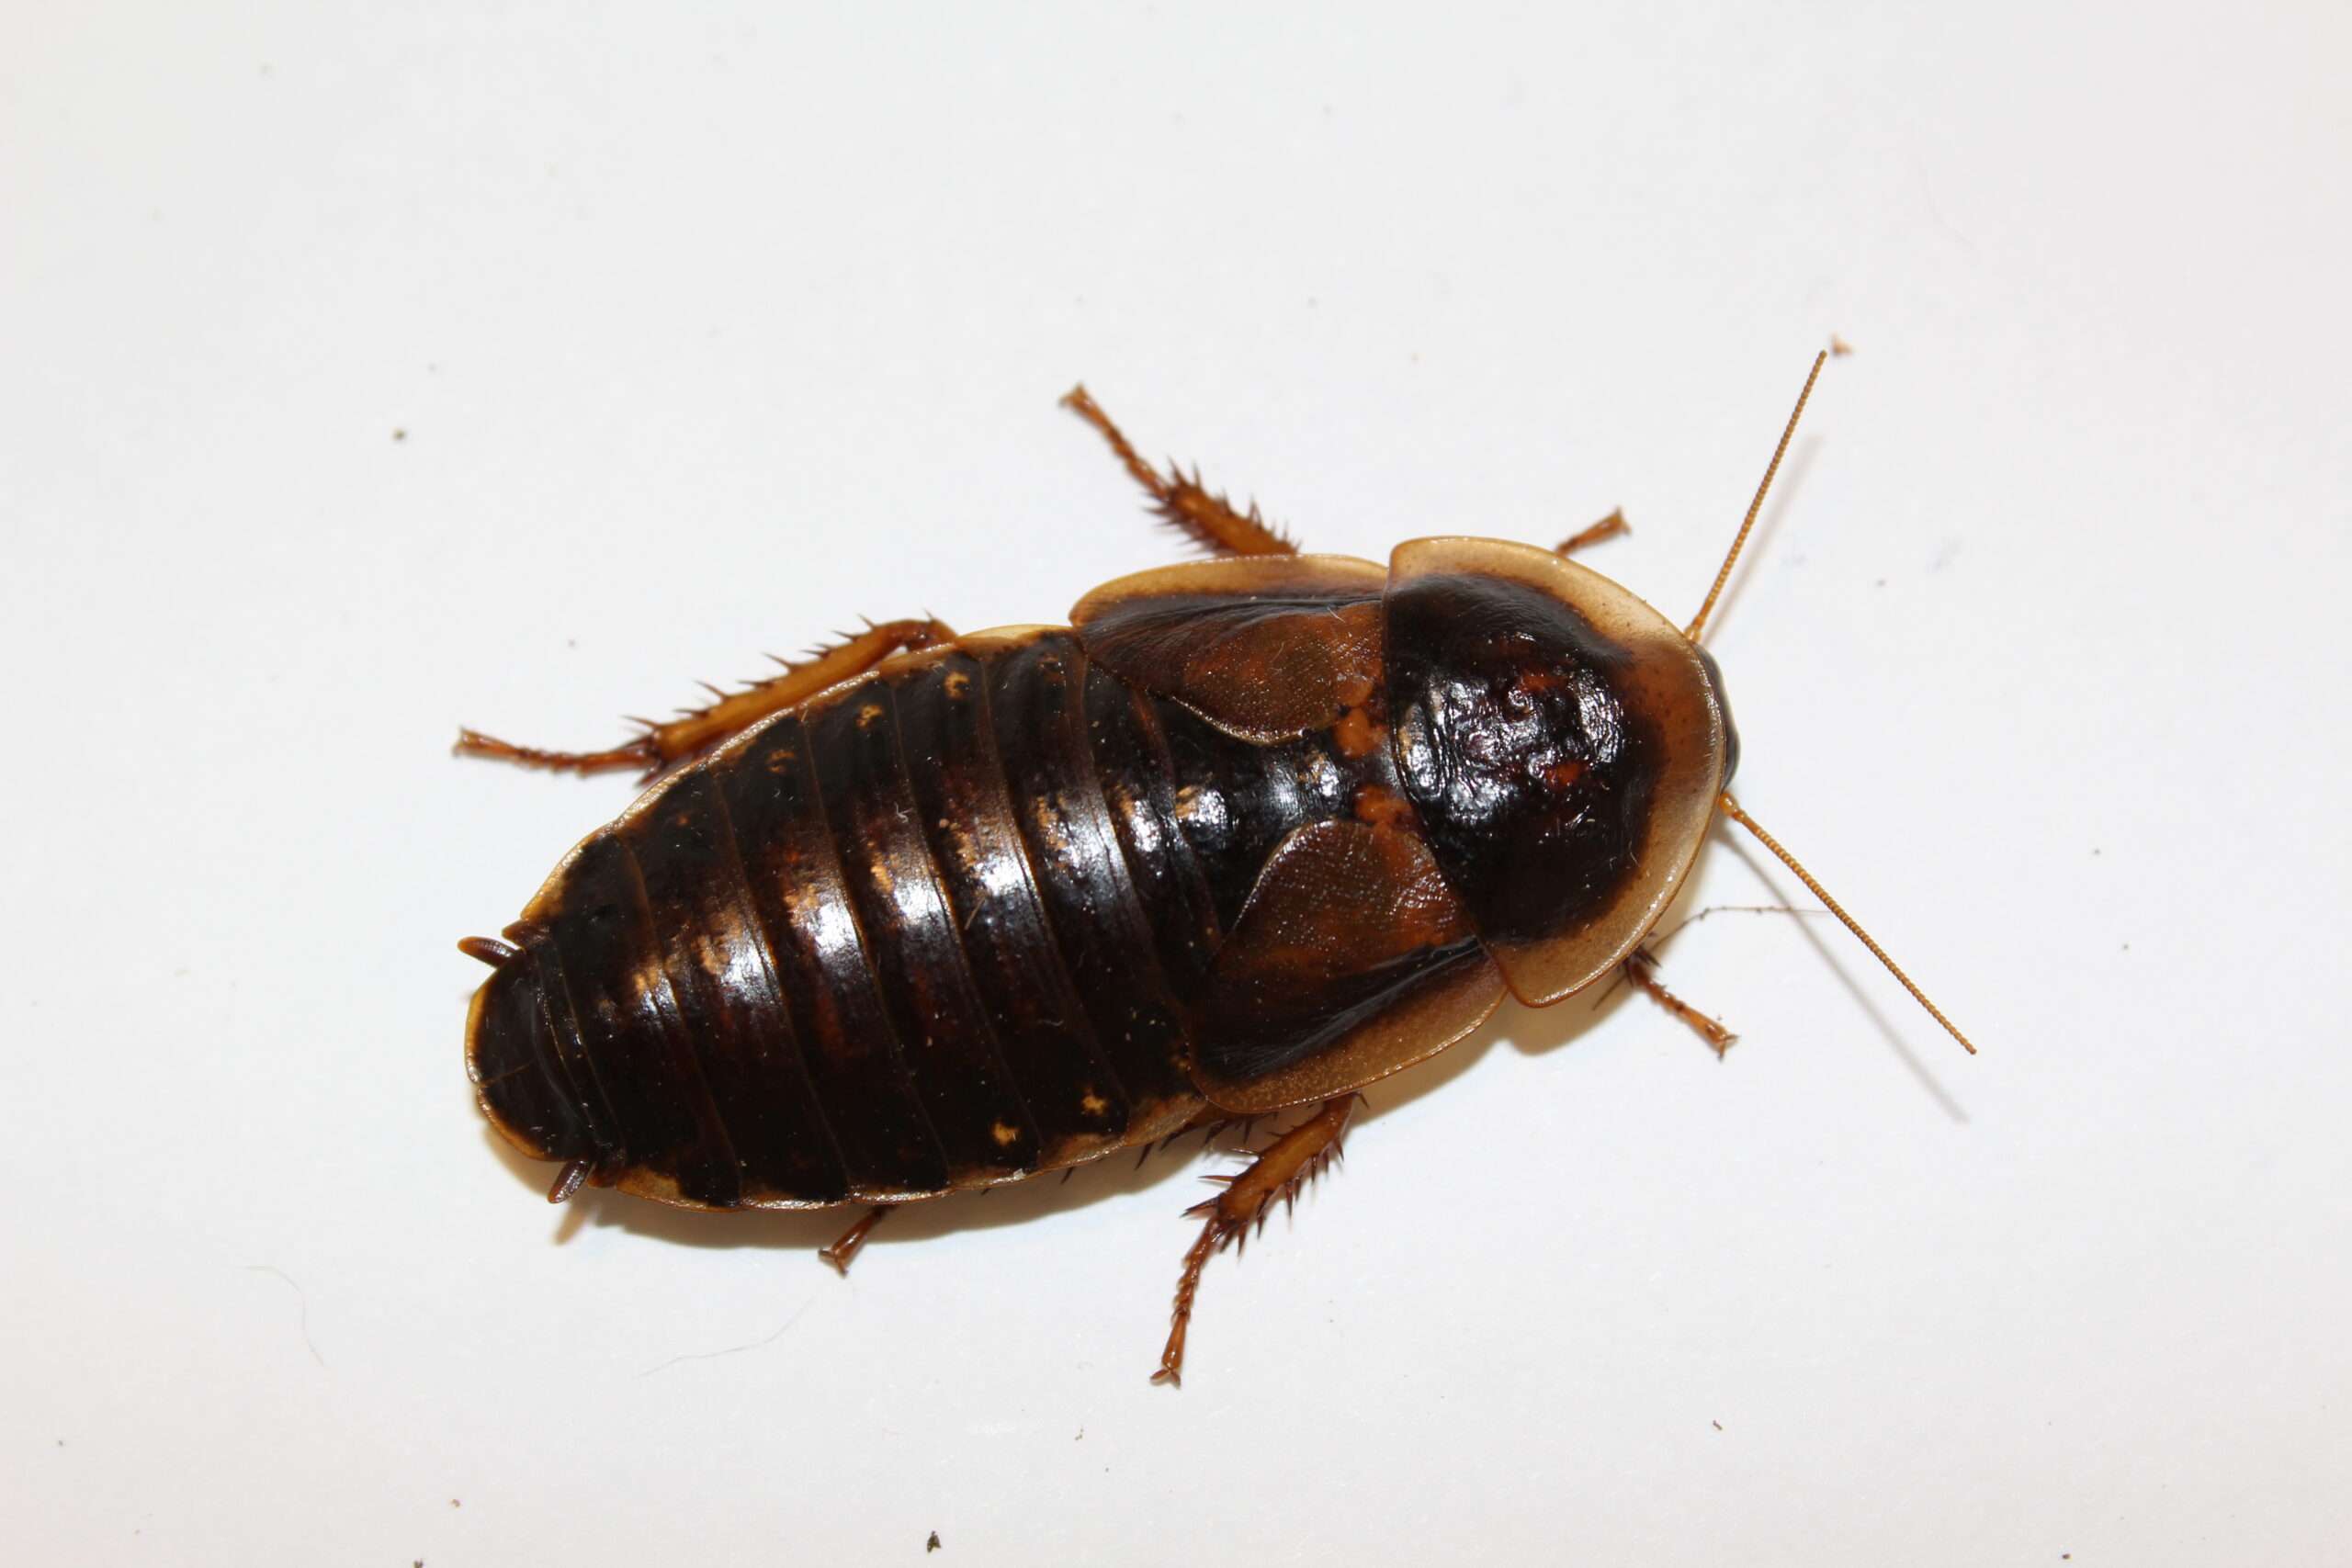 Dubia Cockroaches